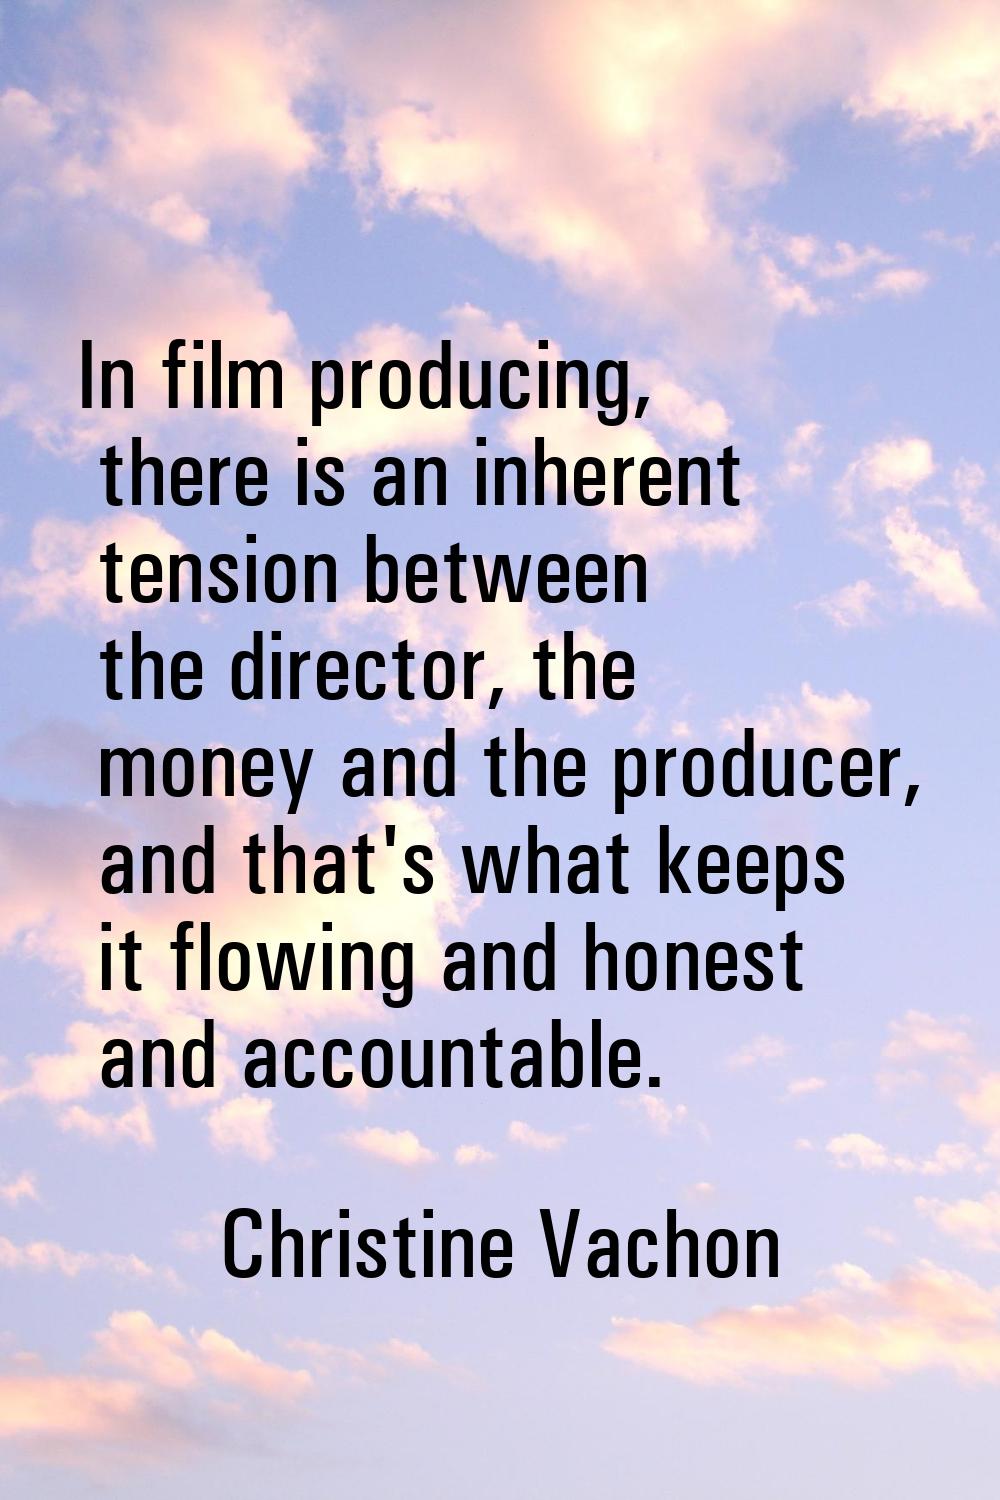 In film producing, there is an inherent tension between the director, the money and the producer, a